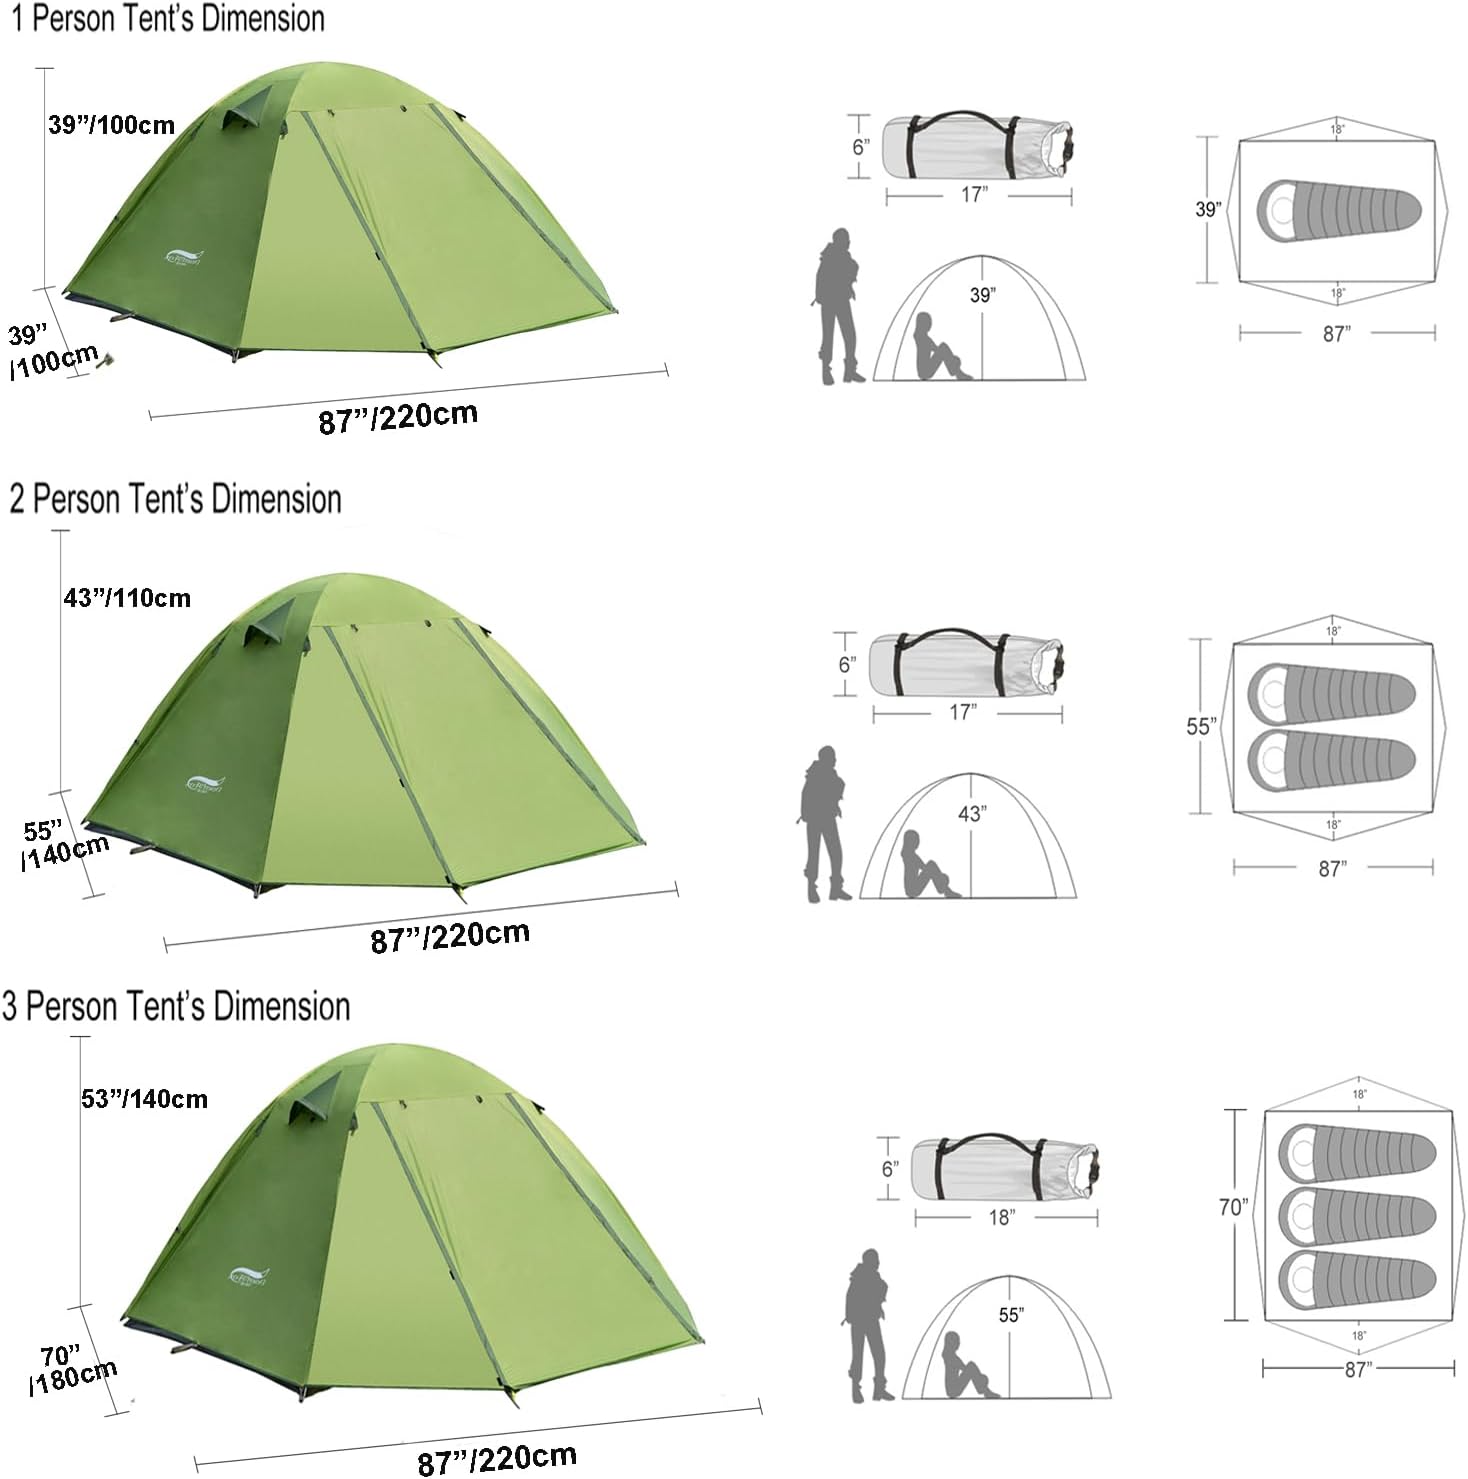 Camping Tents 1/2/3 Person,Outdoor Lightweight Backpacking Tent Waterproof 3 Season